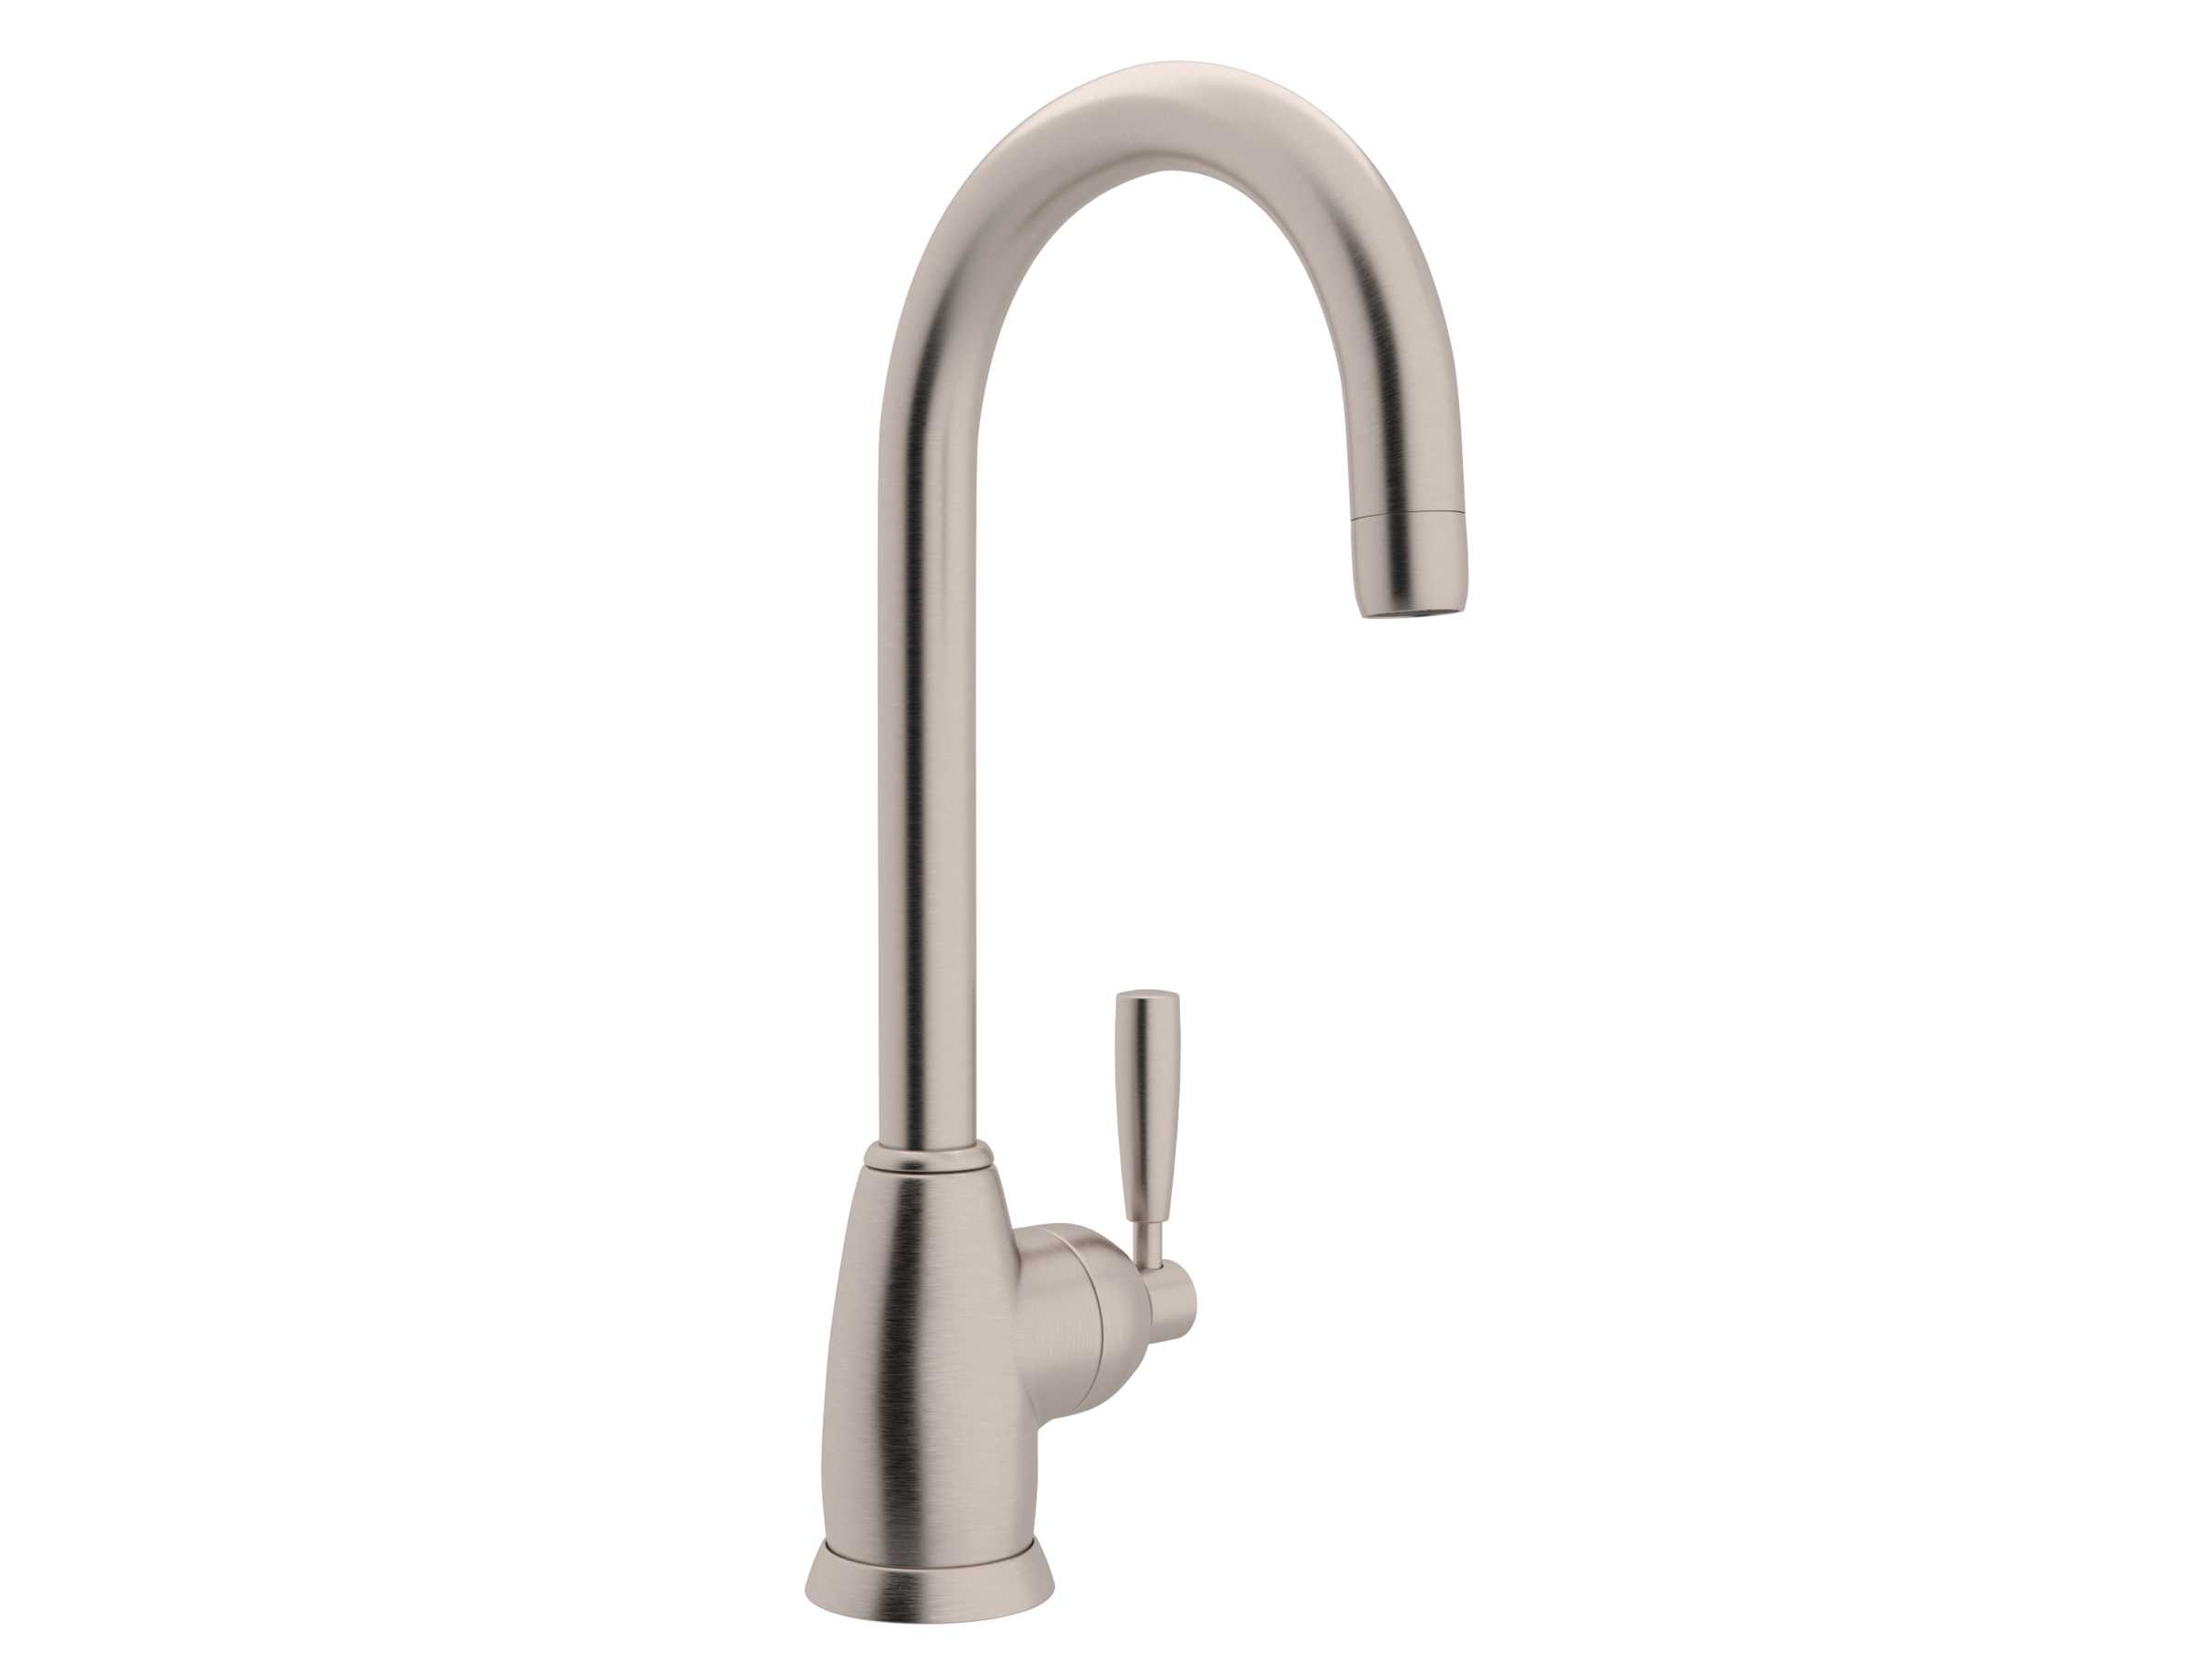 Rohl U.4846LS-APC-2 Perrin and Rowe Contemporary Mimas Single Hole Single Lever Kitchen Faucet with Sidespray and C Spout, Polished Chrome - 1